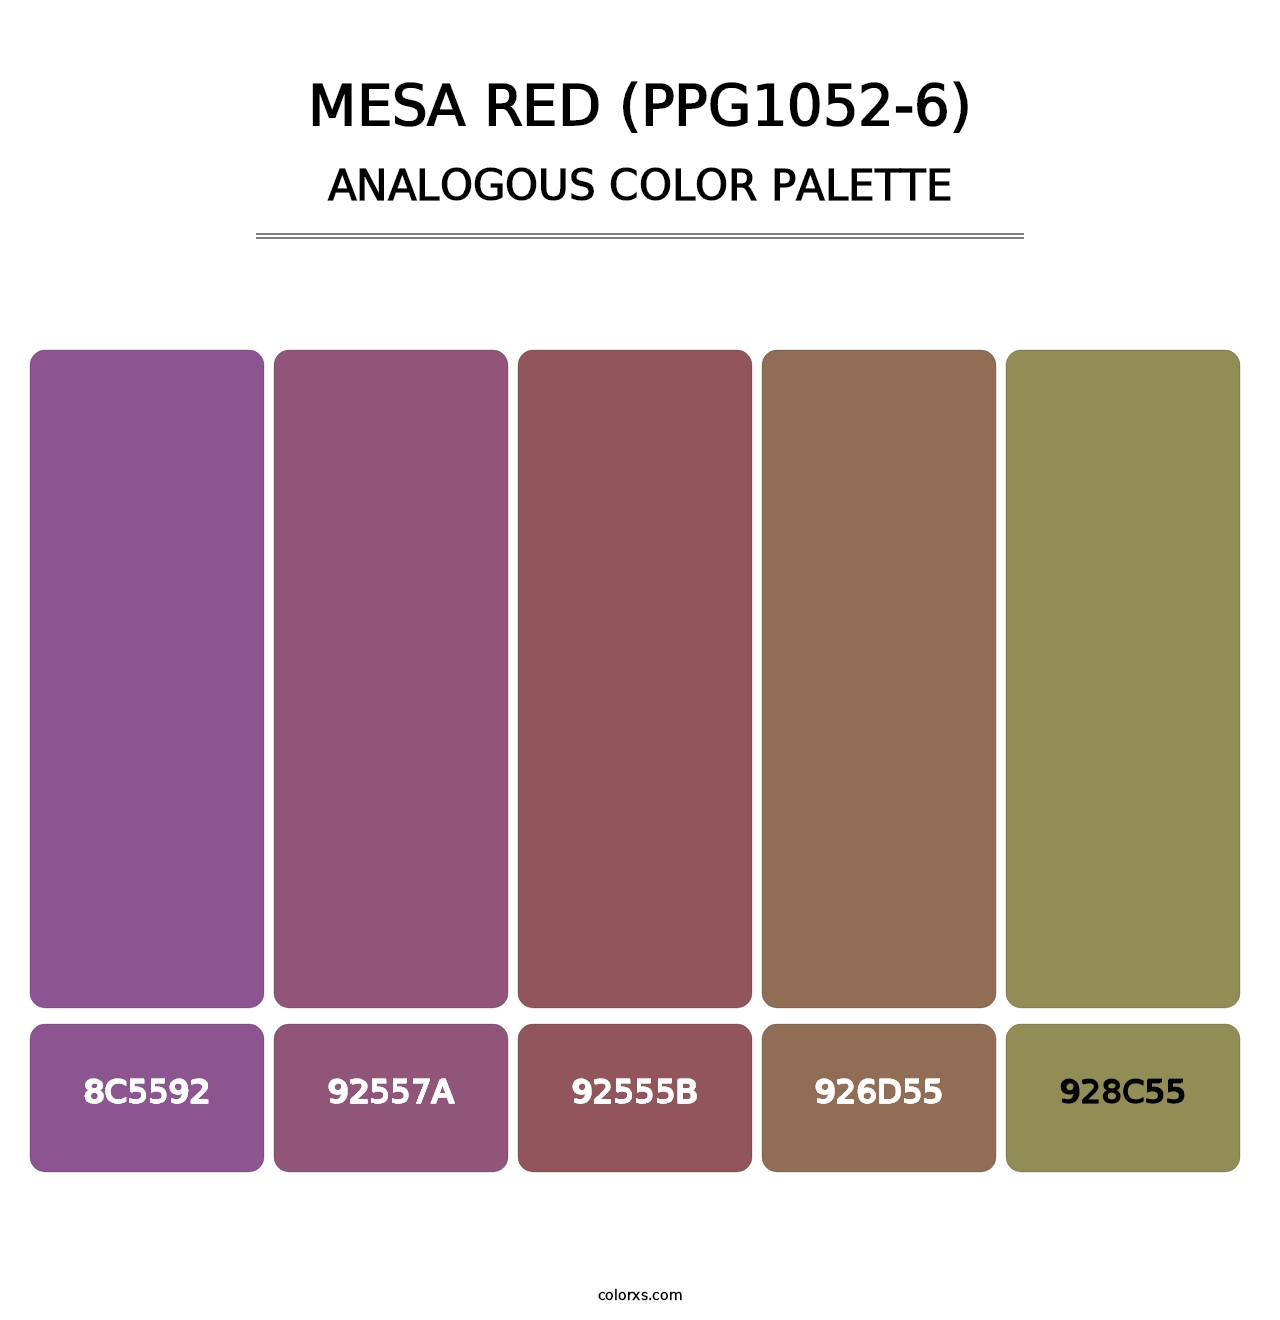 Mesa Red (PPG1052-6) - Analogous Color Palette